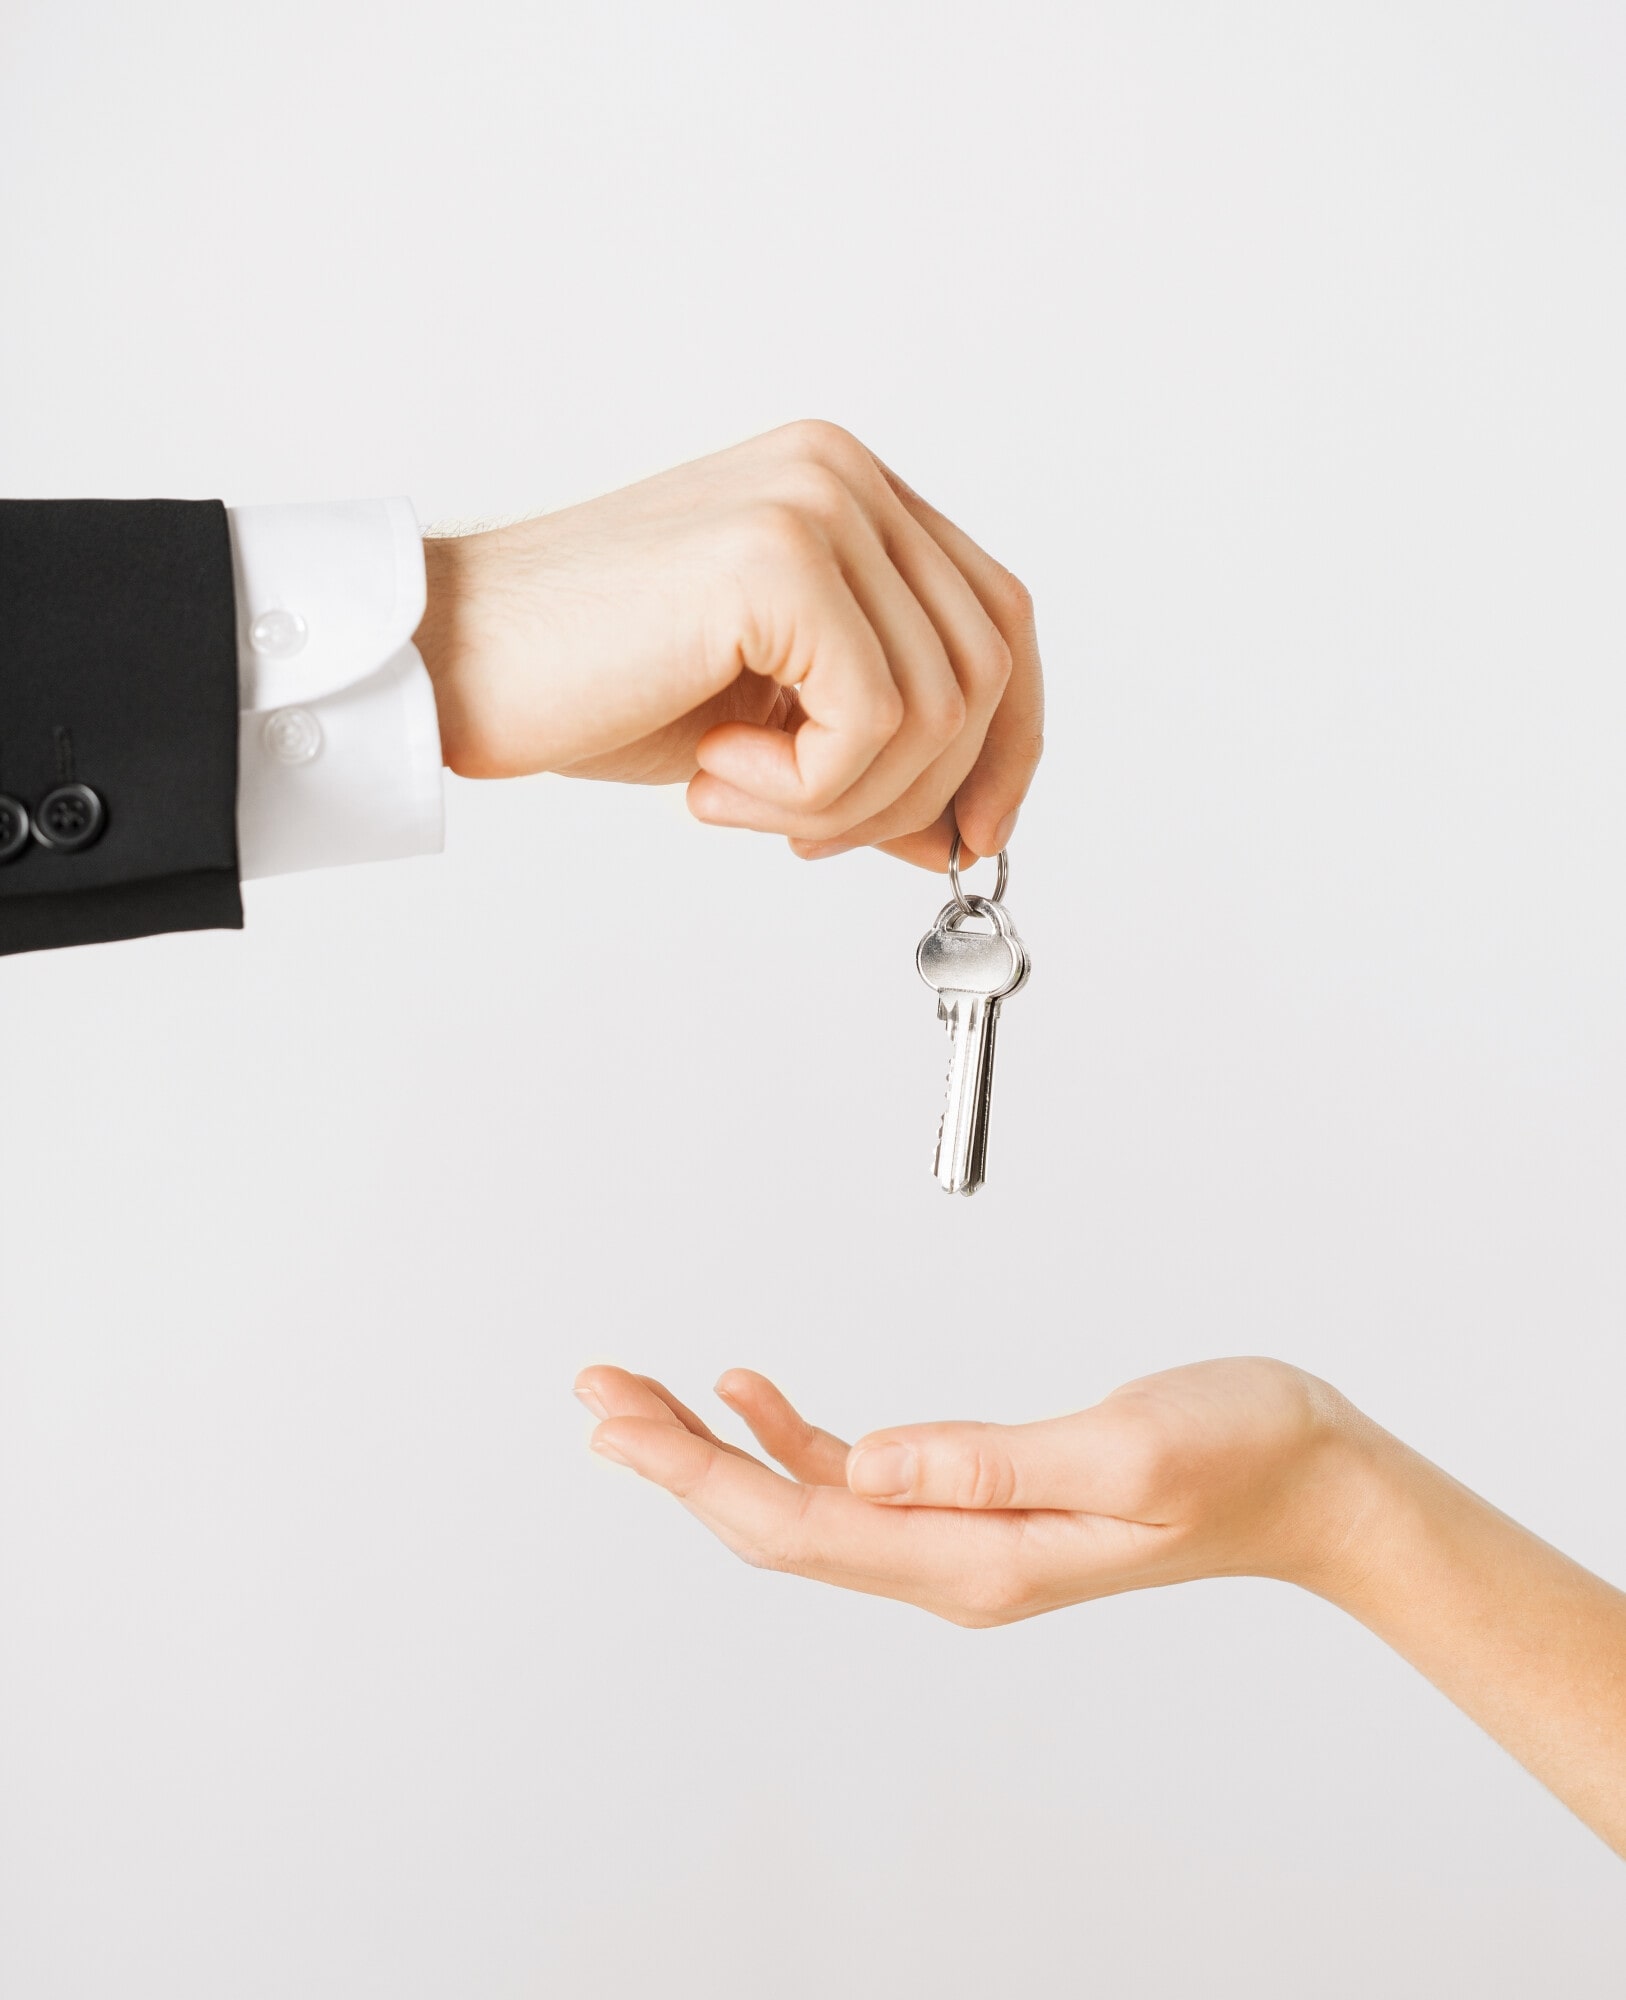 Leasing Management: How to Keep Great Tenants in Your Goldsboro, NC Investment Property